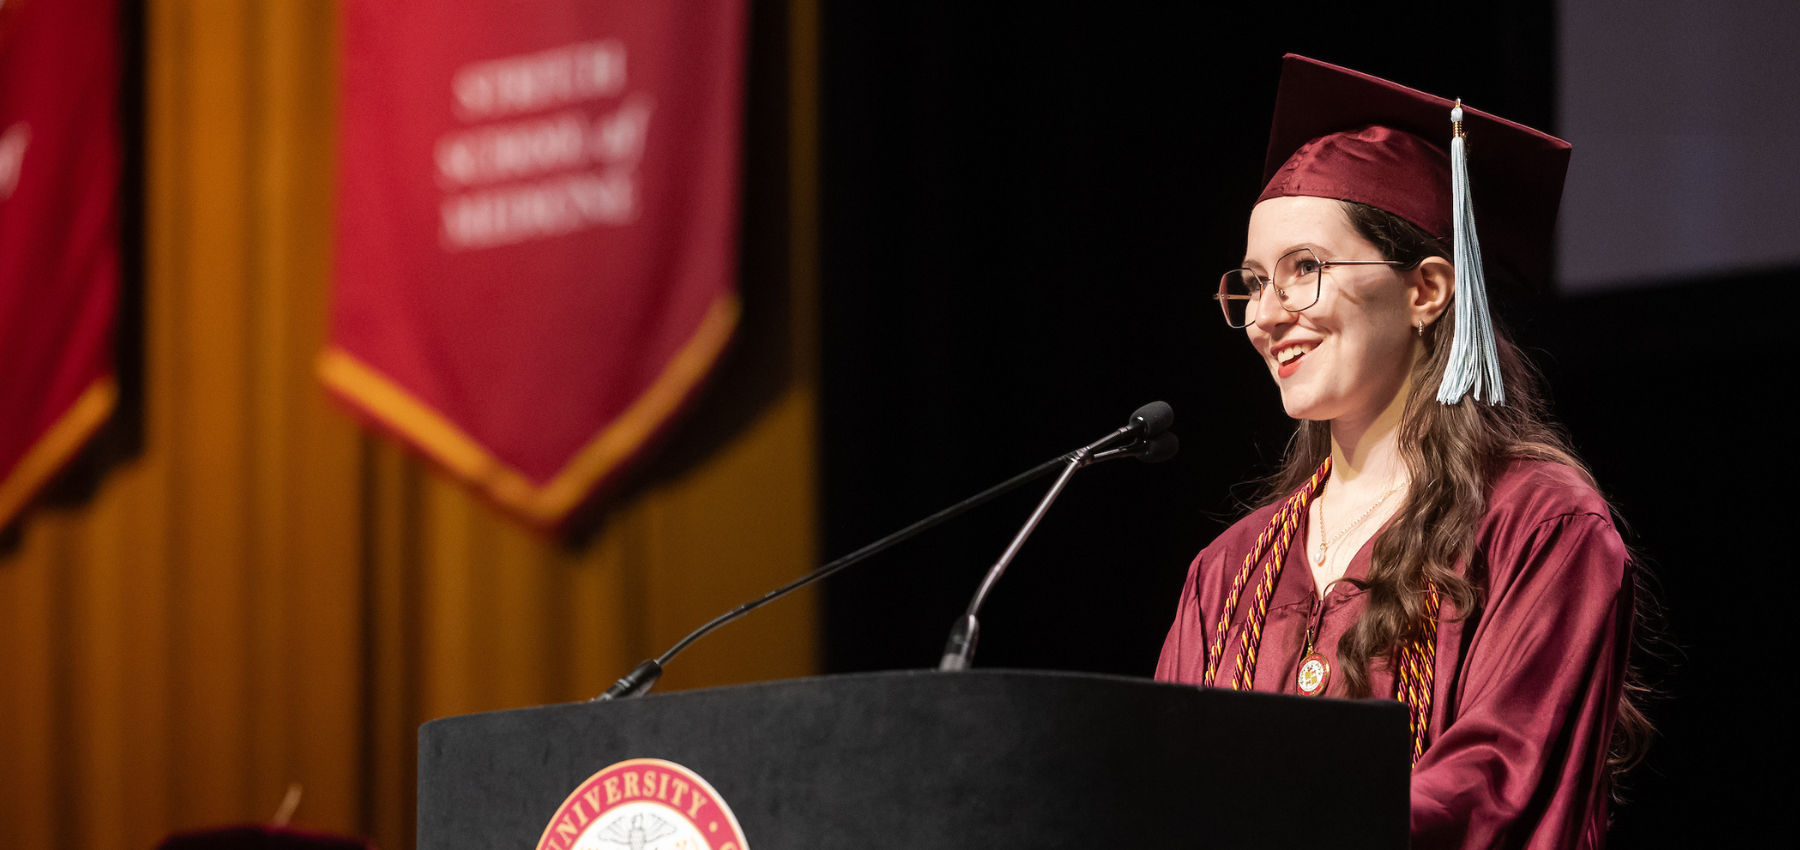 Loyola School of Education graduate and commencement speaker, Elizabeth Usher during commencement